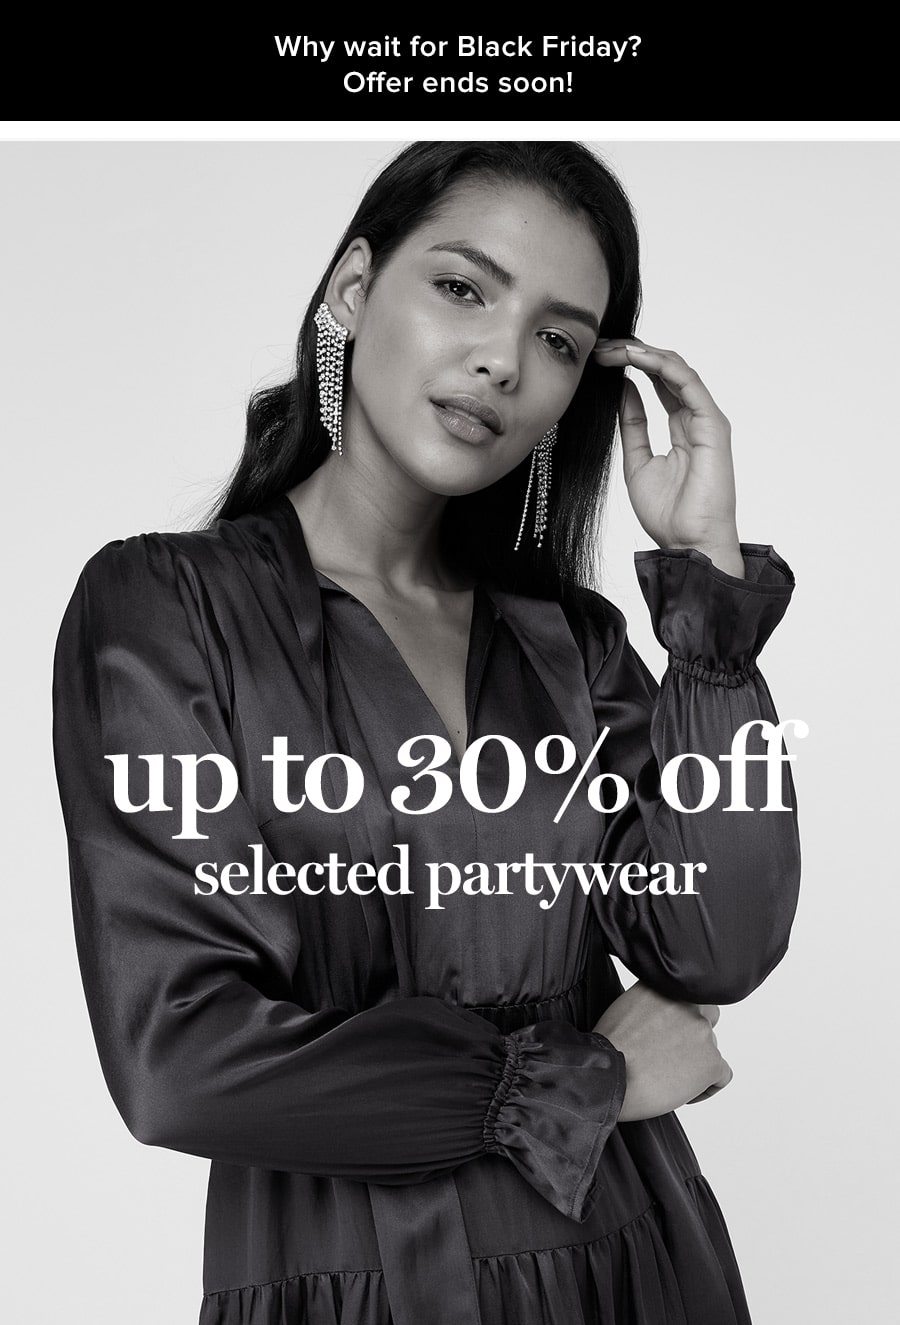 Up to 30% off selected partywear